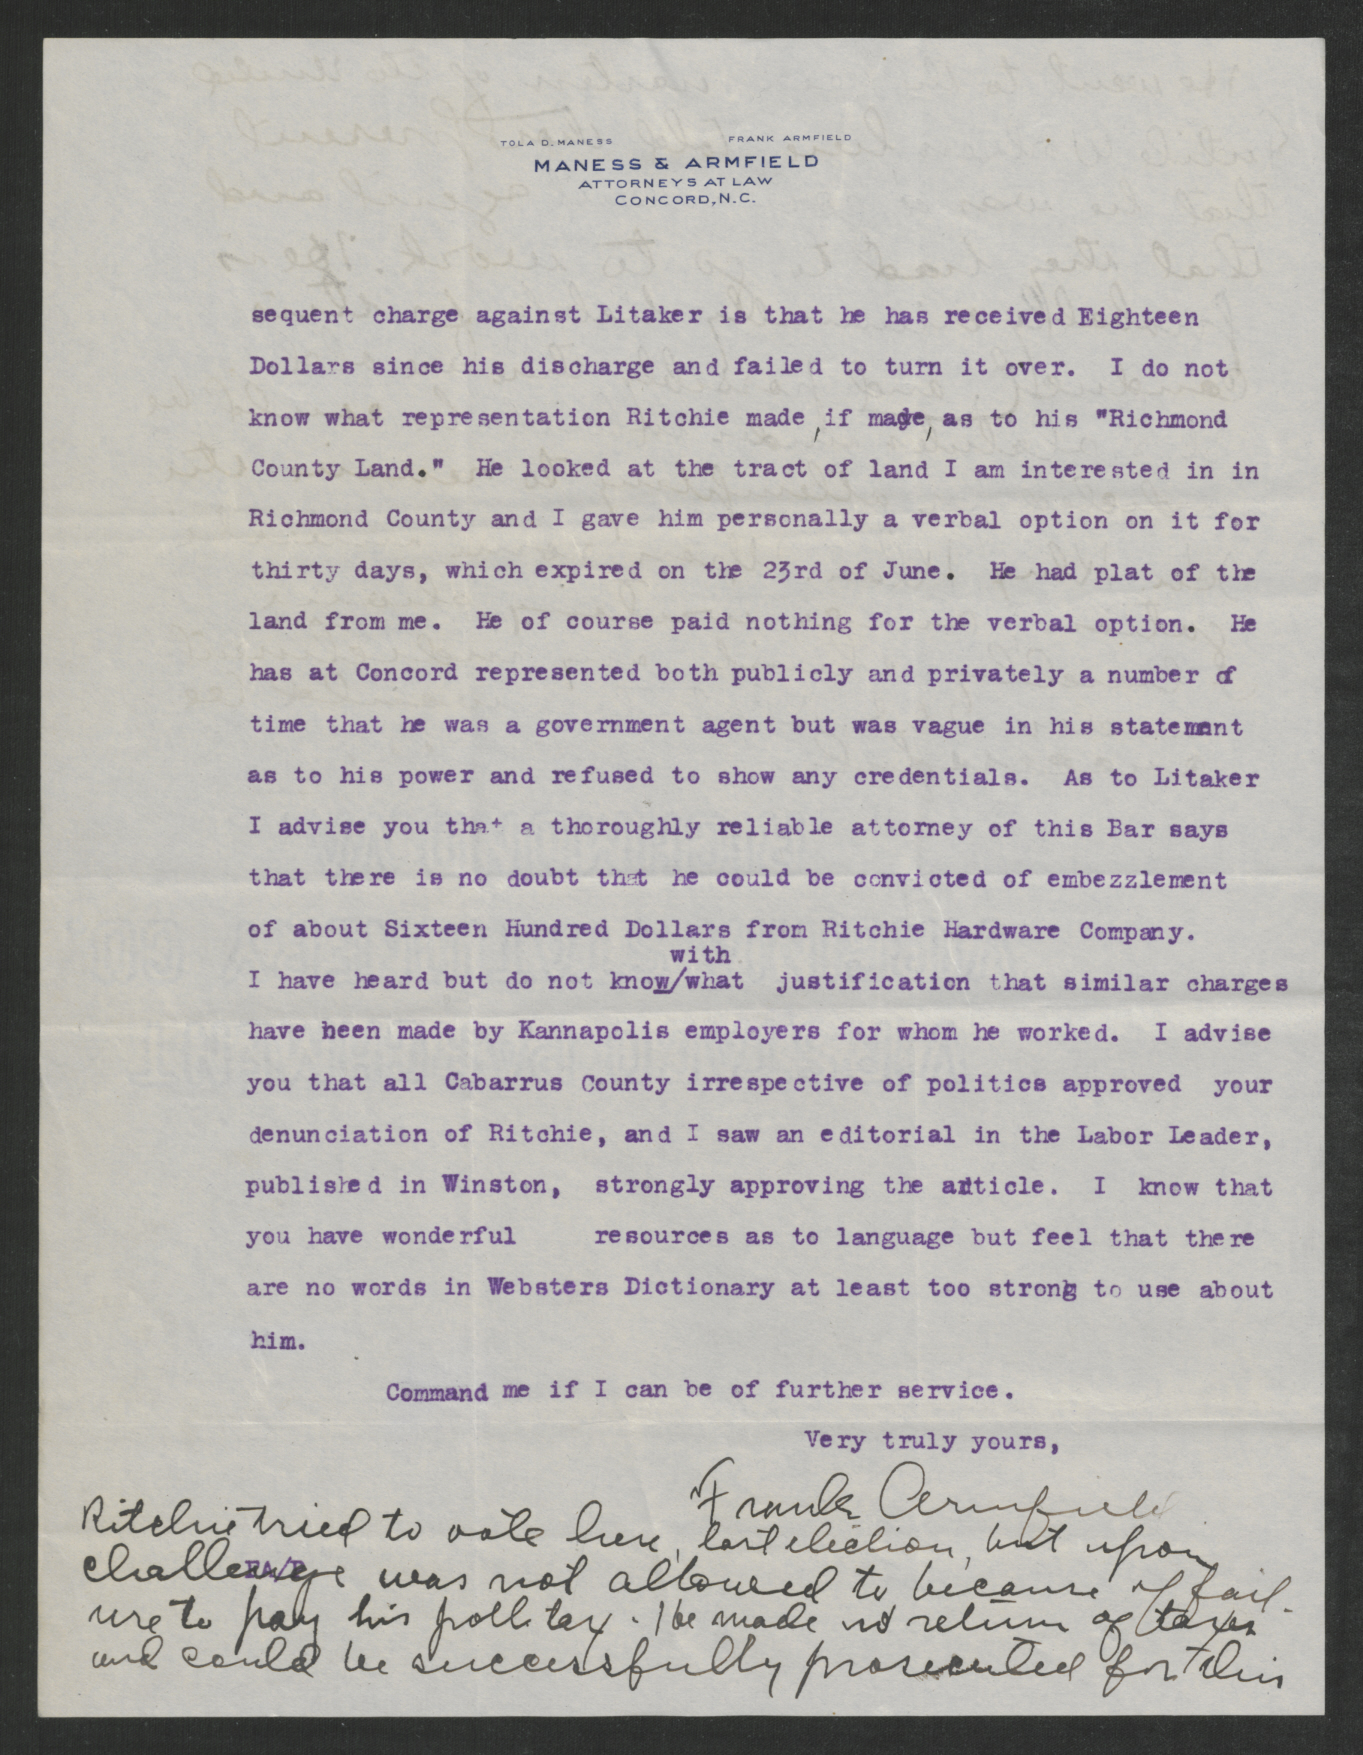 Letter from Frank Armfield, Sr., to Thomas W. Bickett, July 9, 1919, page 2